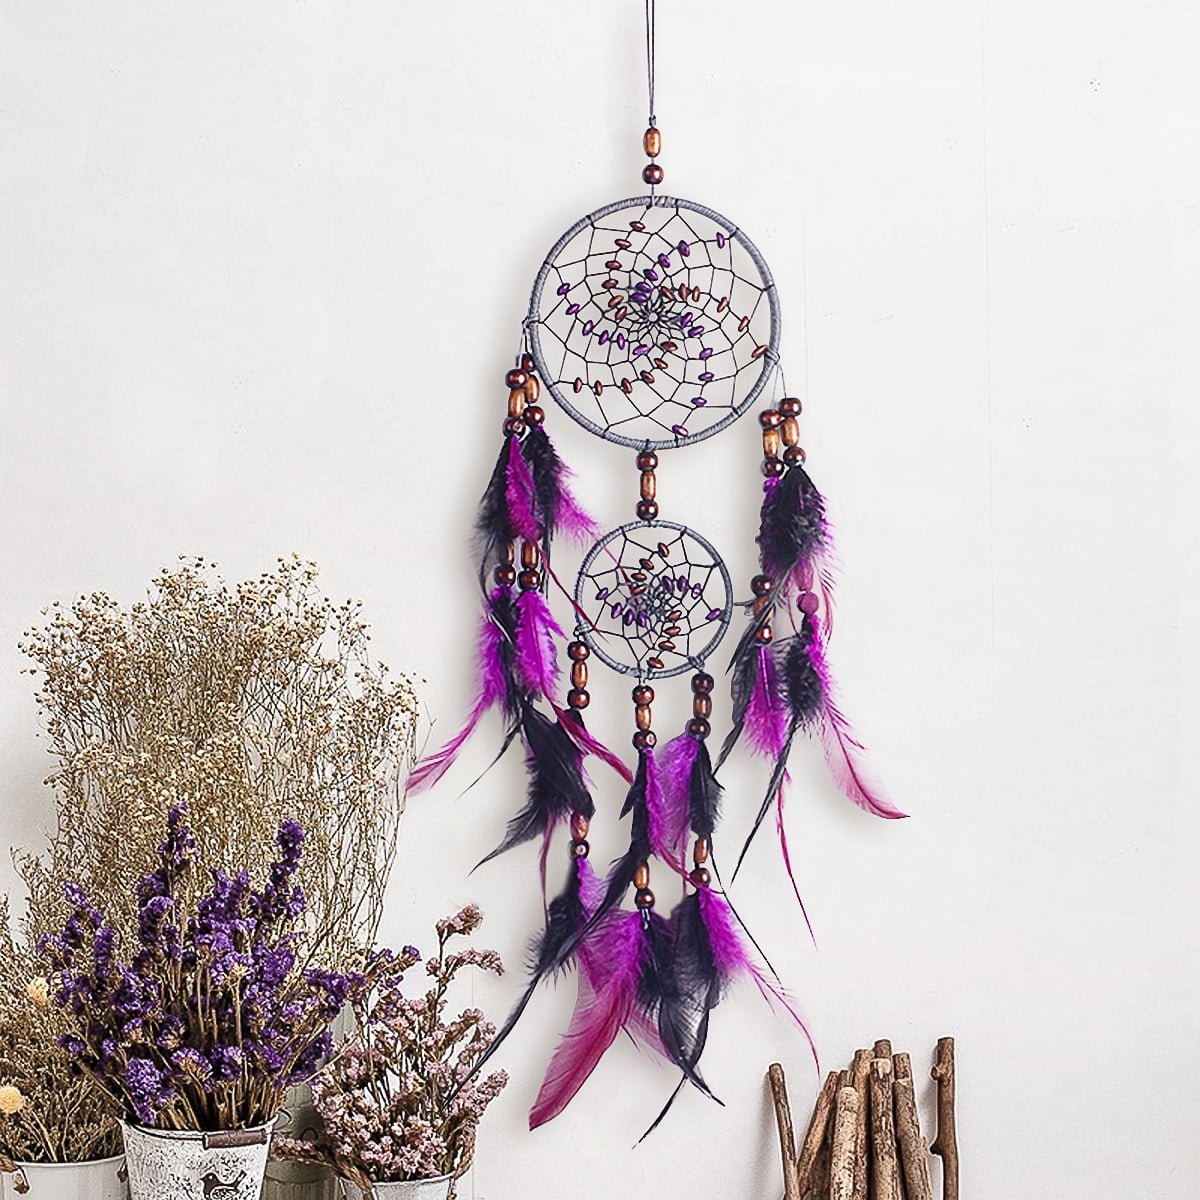 11"x 9" Indian Maiden Wolf Dream Catcher Wall Hang Decor Feathers Framed Beads 